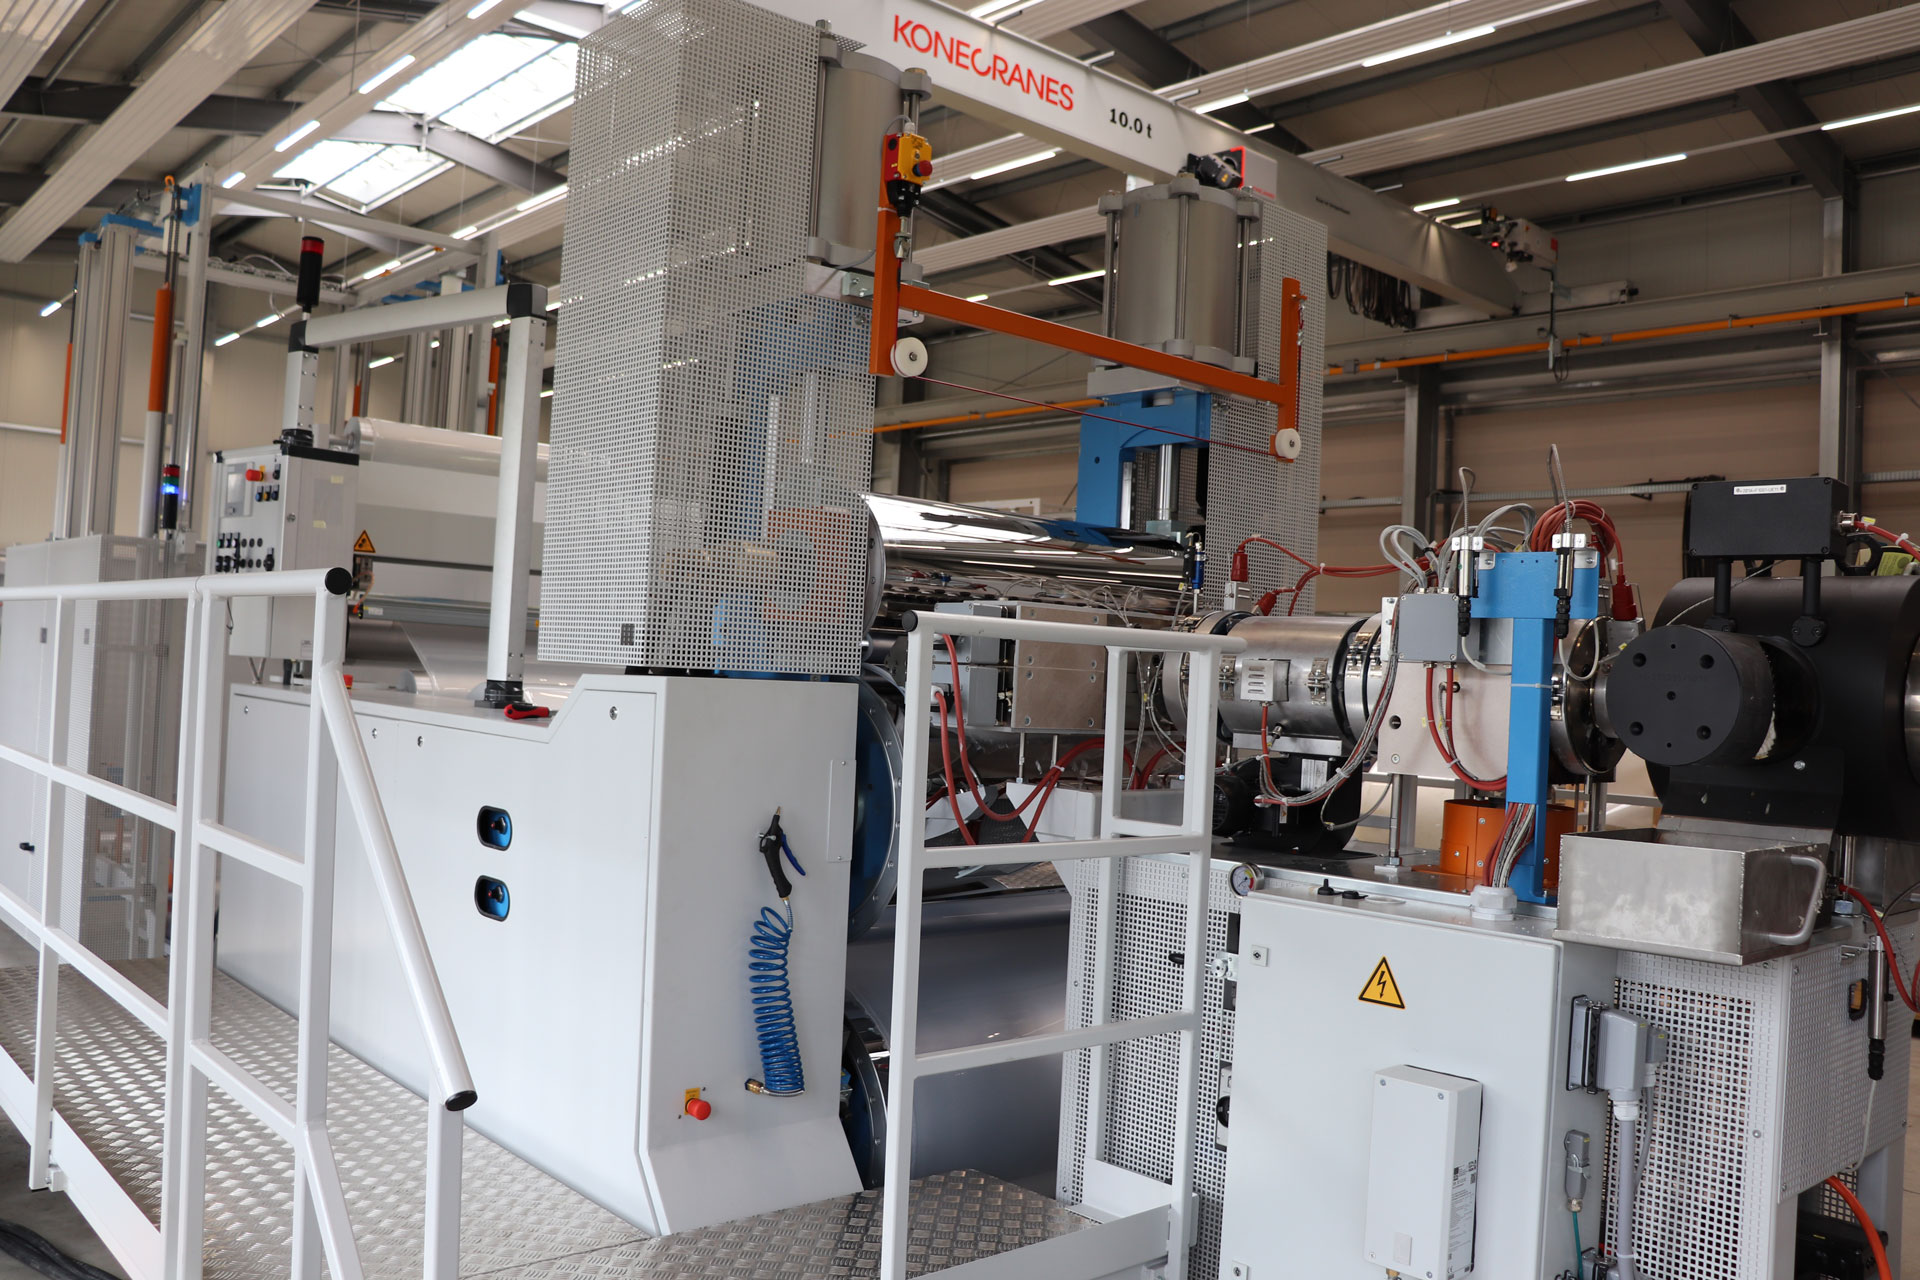 An extrusion machinery line for producing film, sheets and panels from polystyrene and polypropylene.